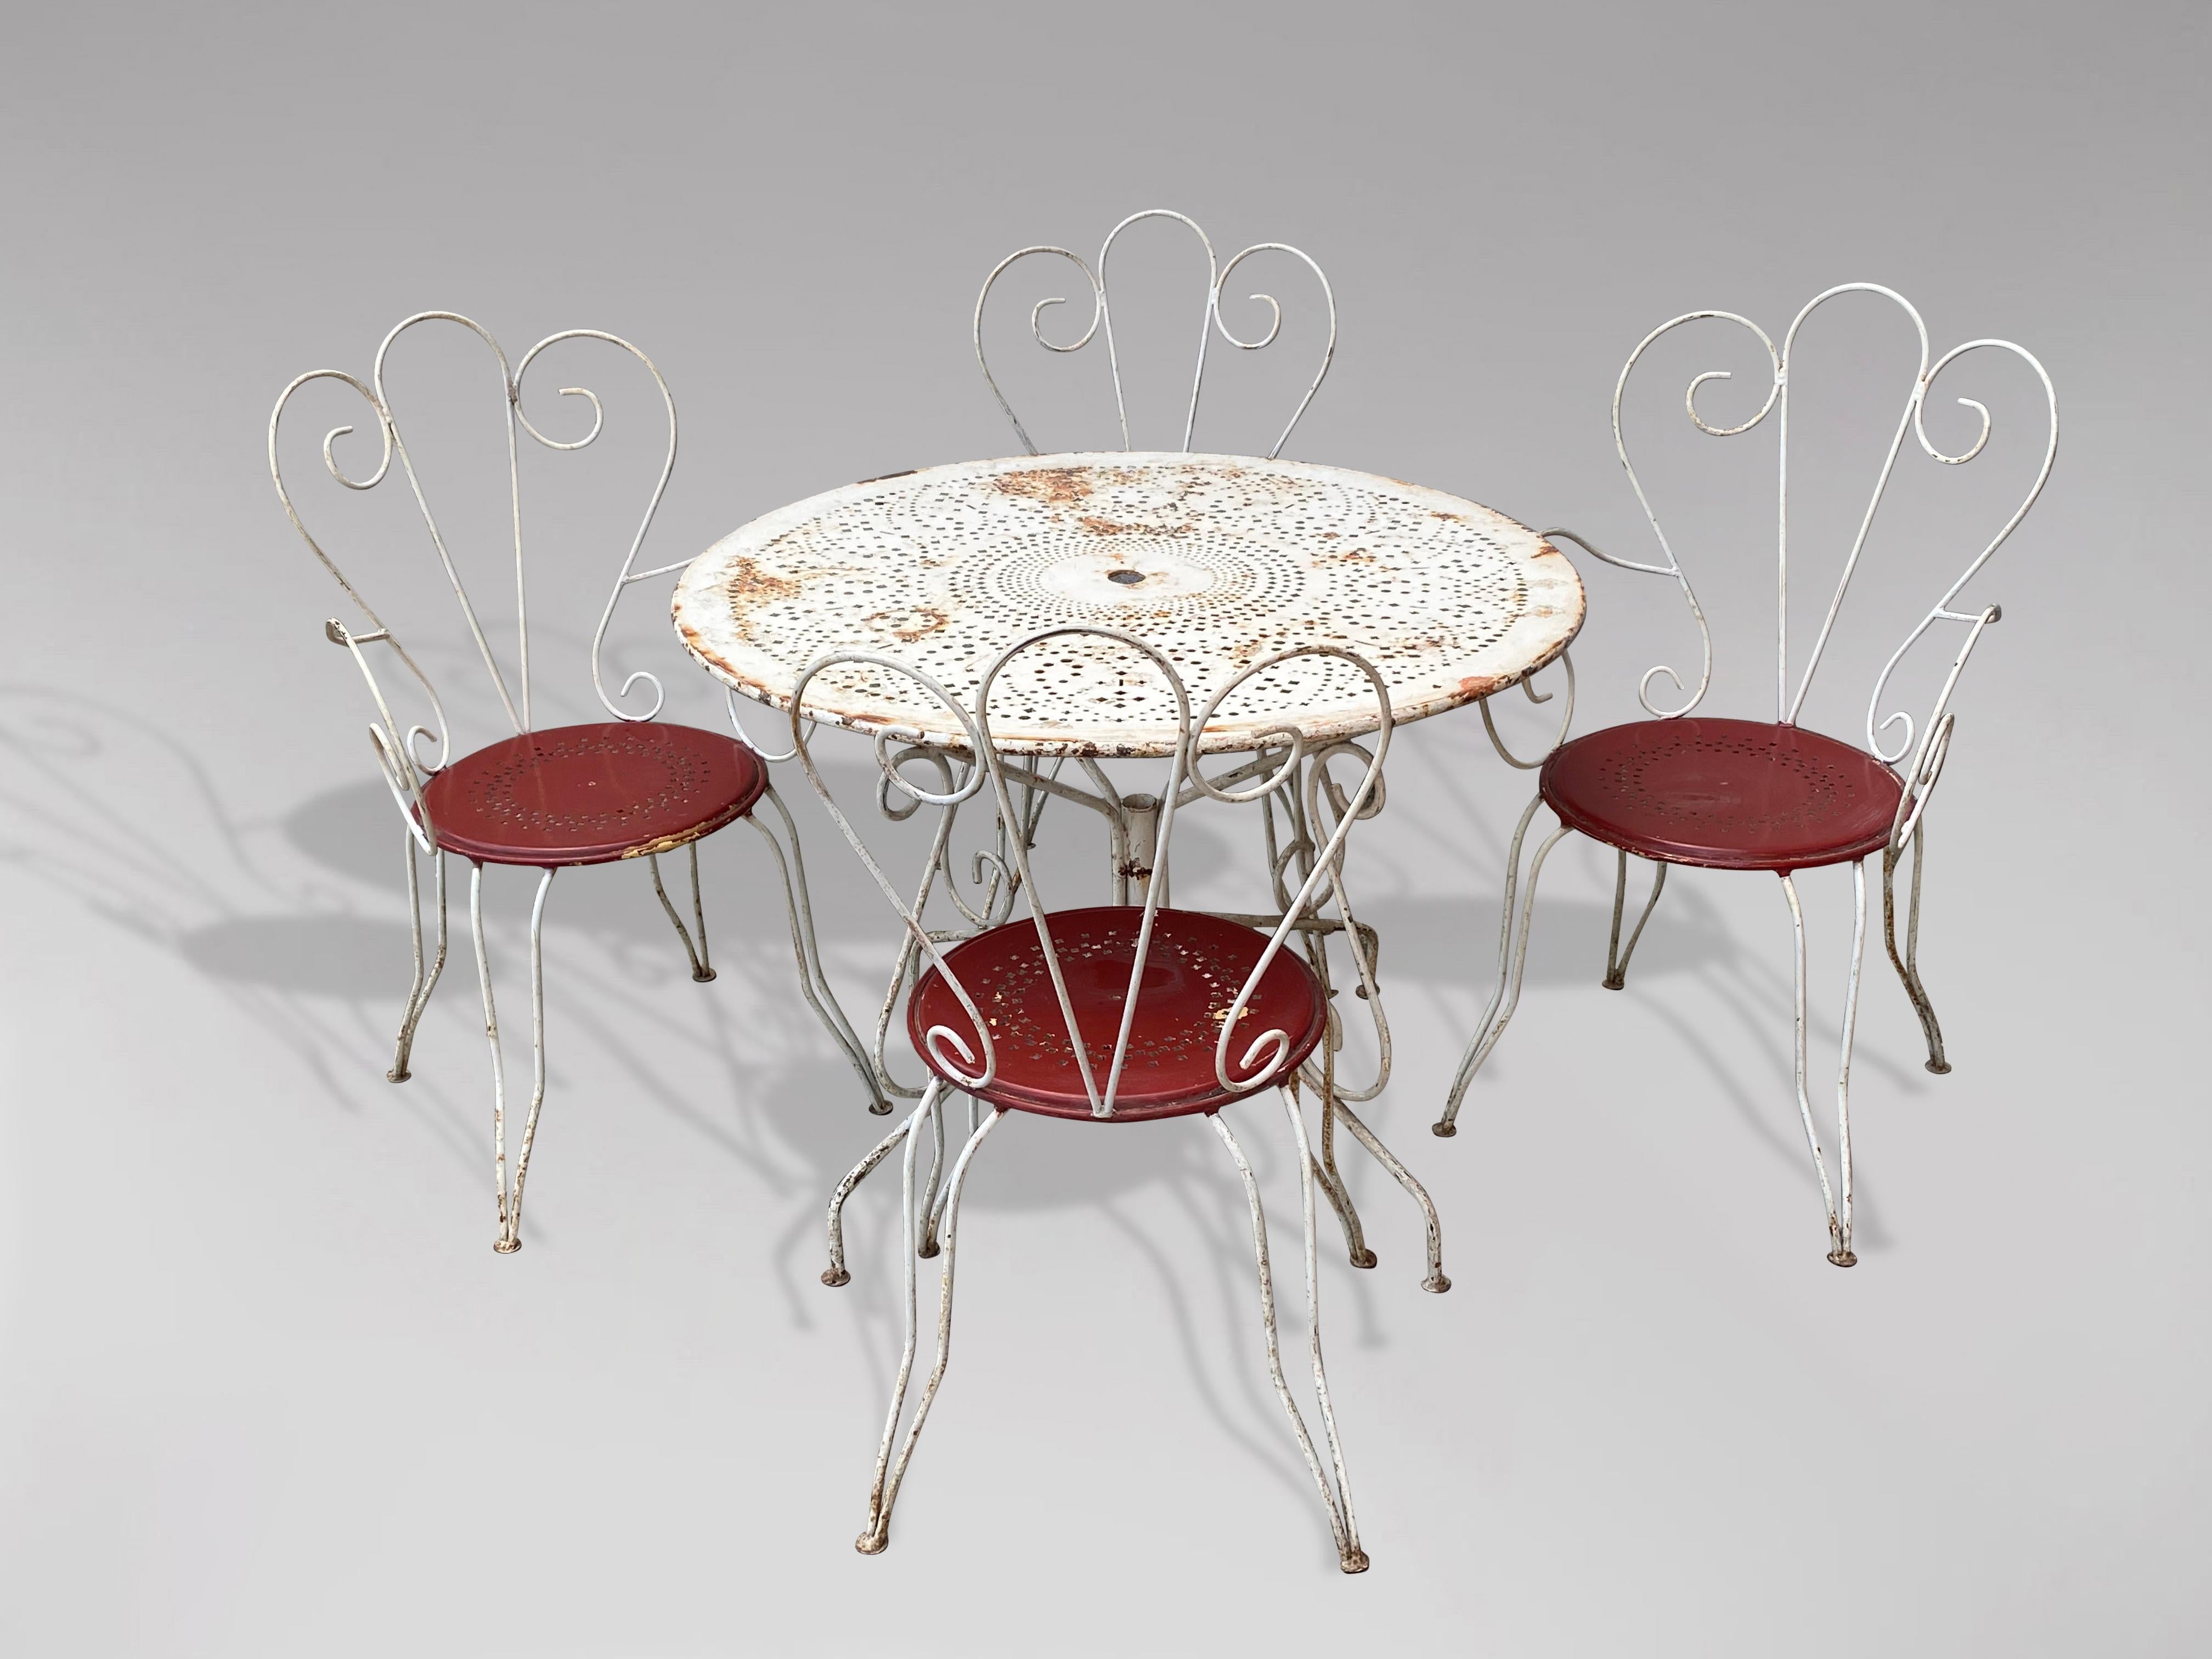 A mid 20th century French Riviera, original white painted wrought iron outdoor setting of classic design comprising the original fretted metal top round table and its 2 chairs and 2 armchairs. The chairs have wrap around backs and red painted